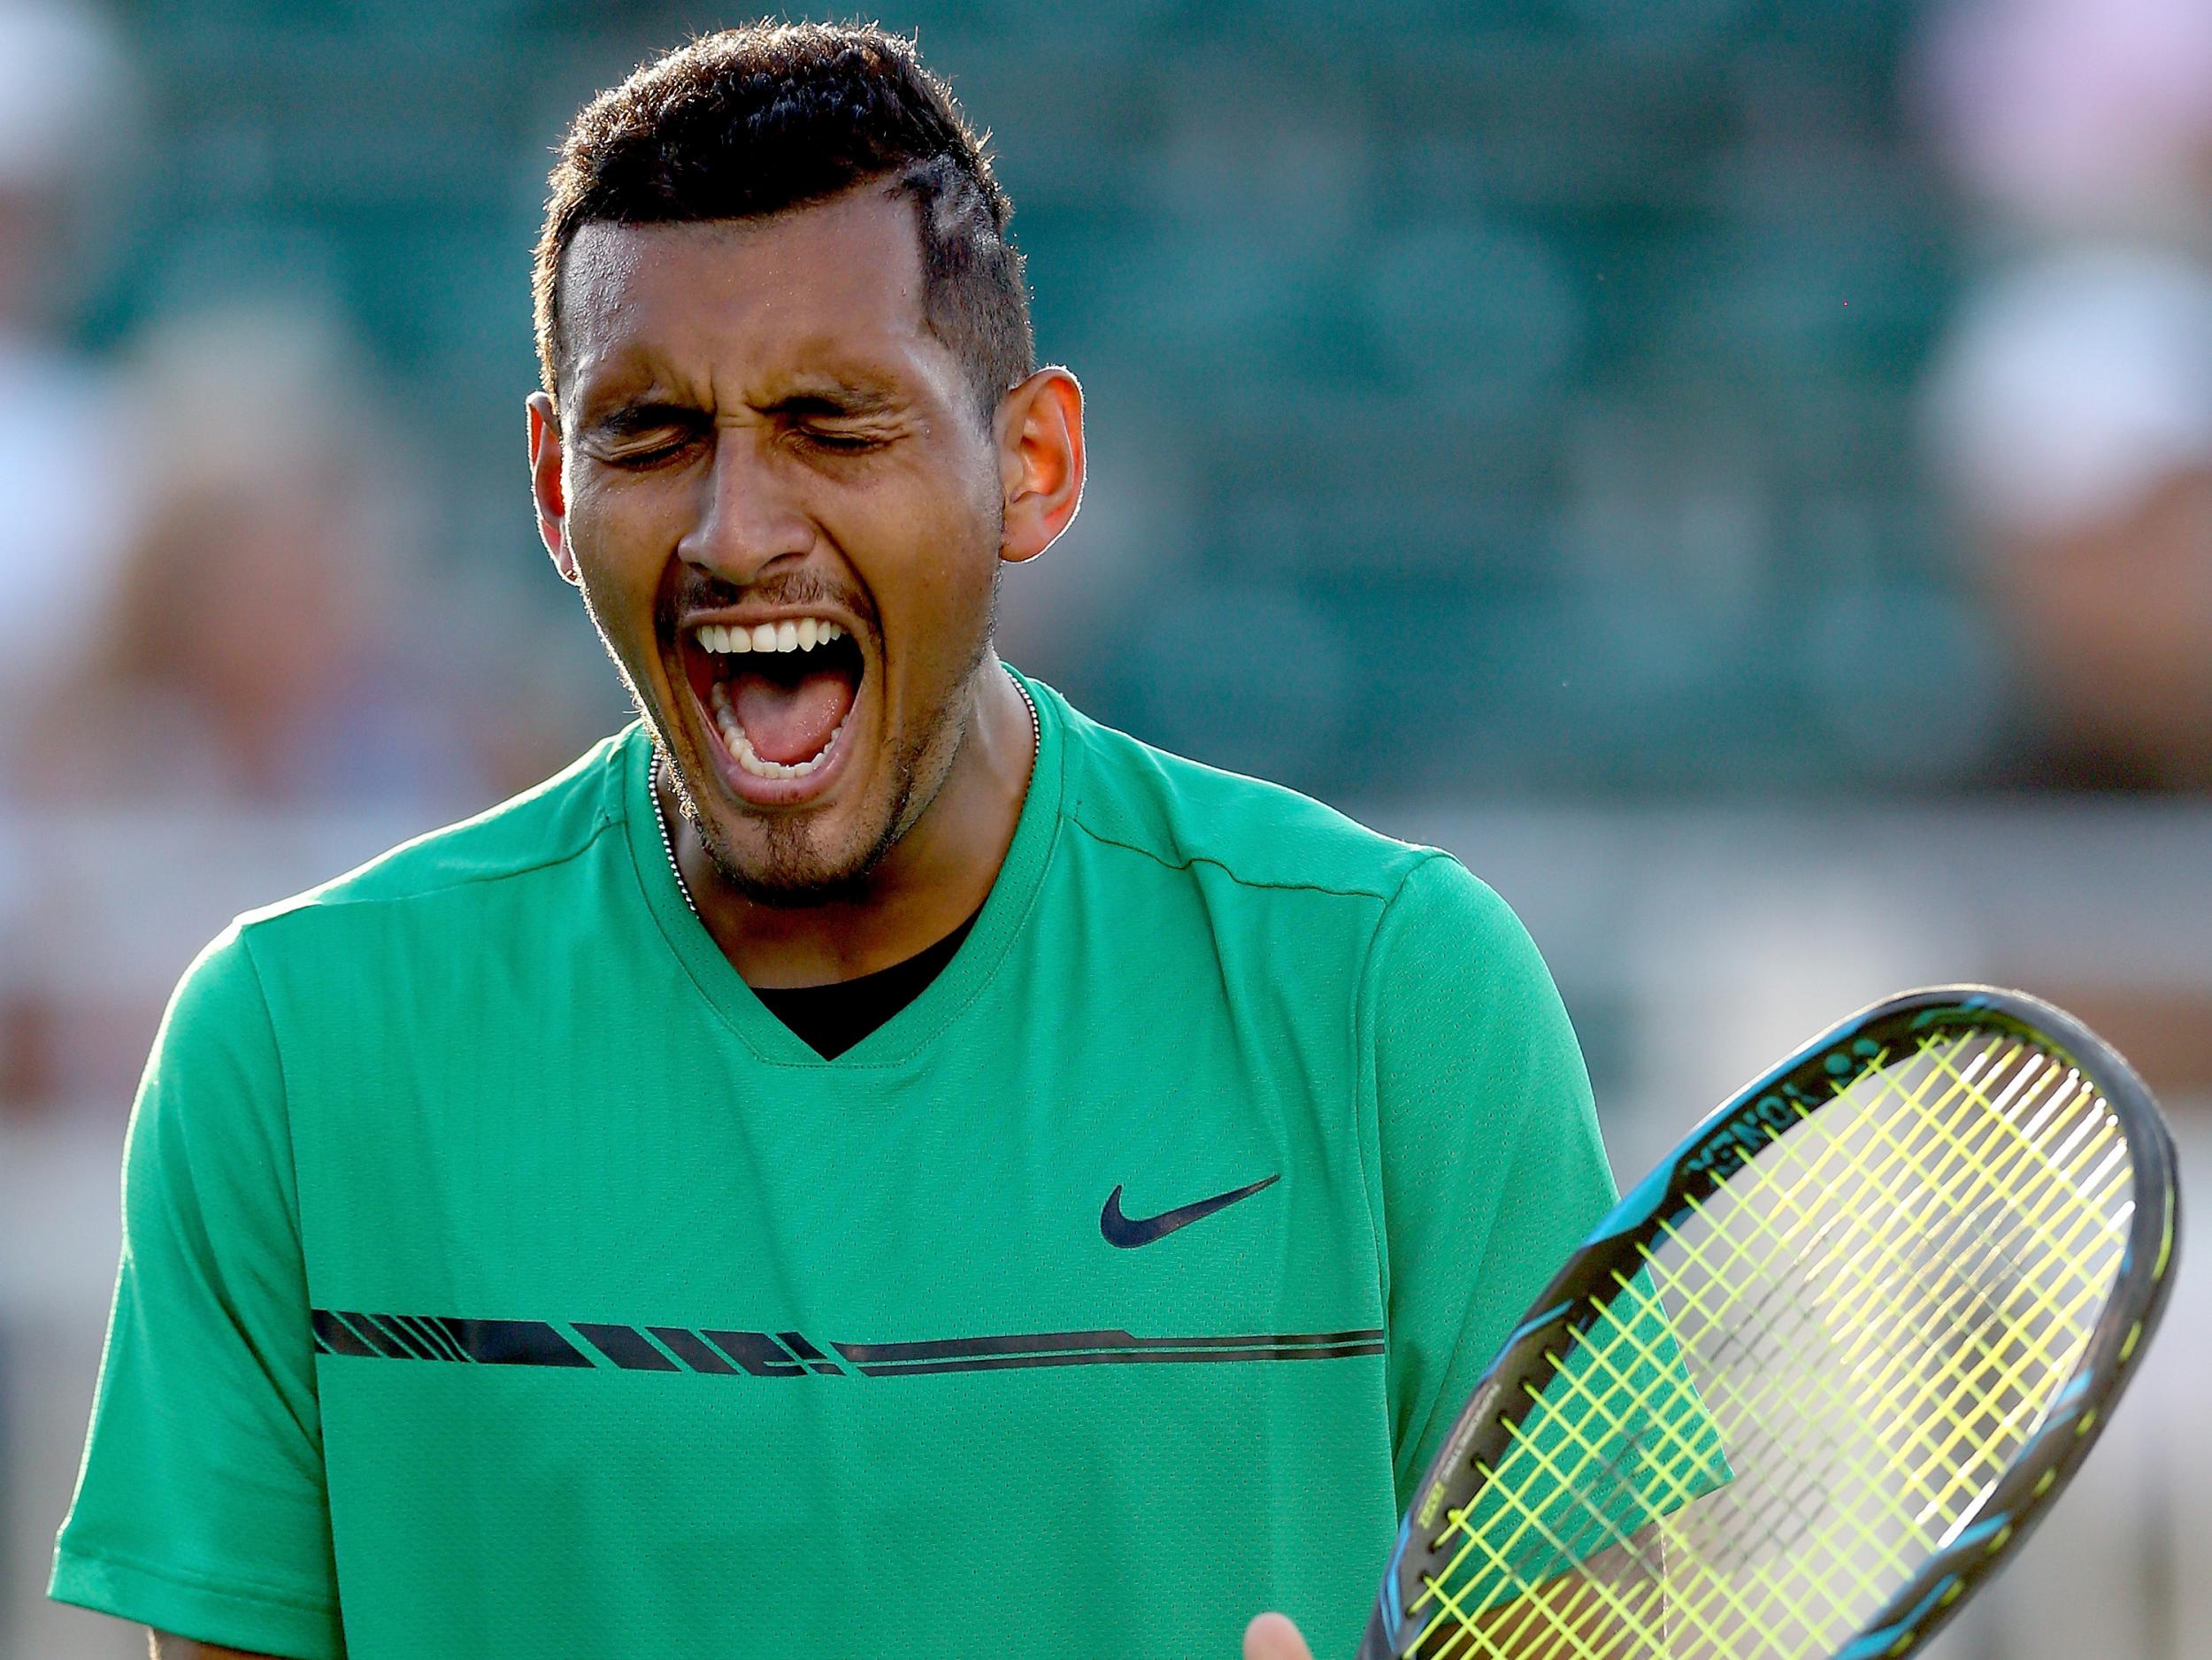 Kyrgios has been in fine form on the hard courts